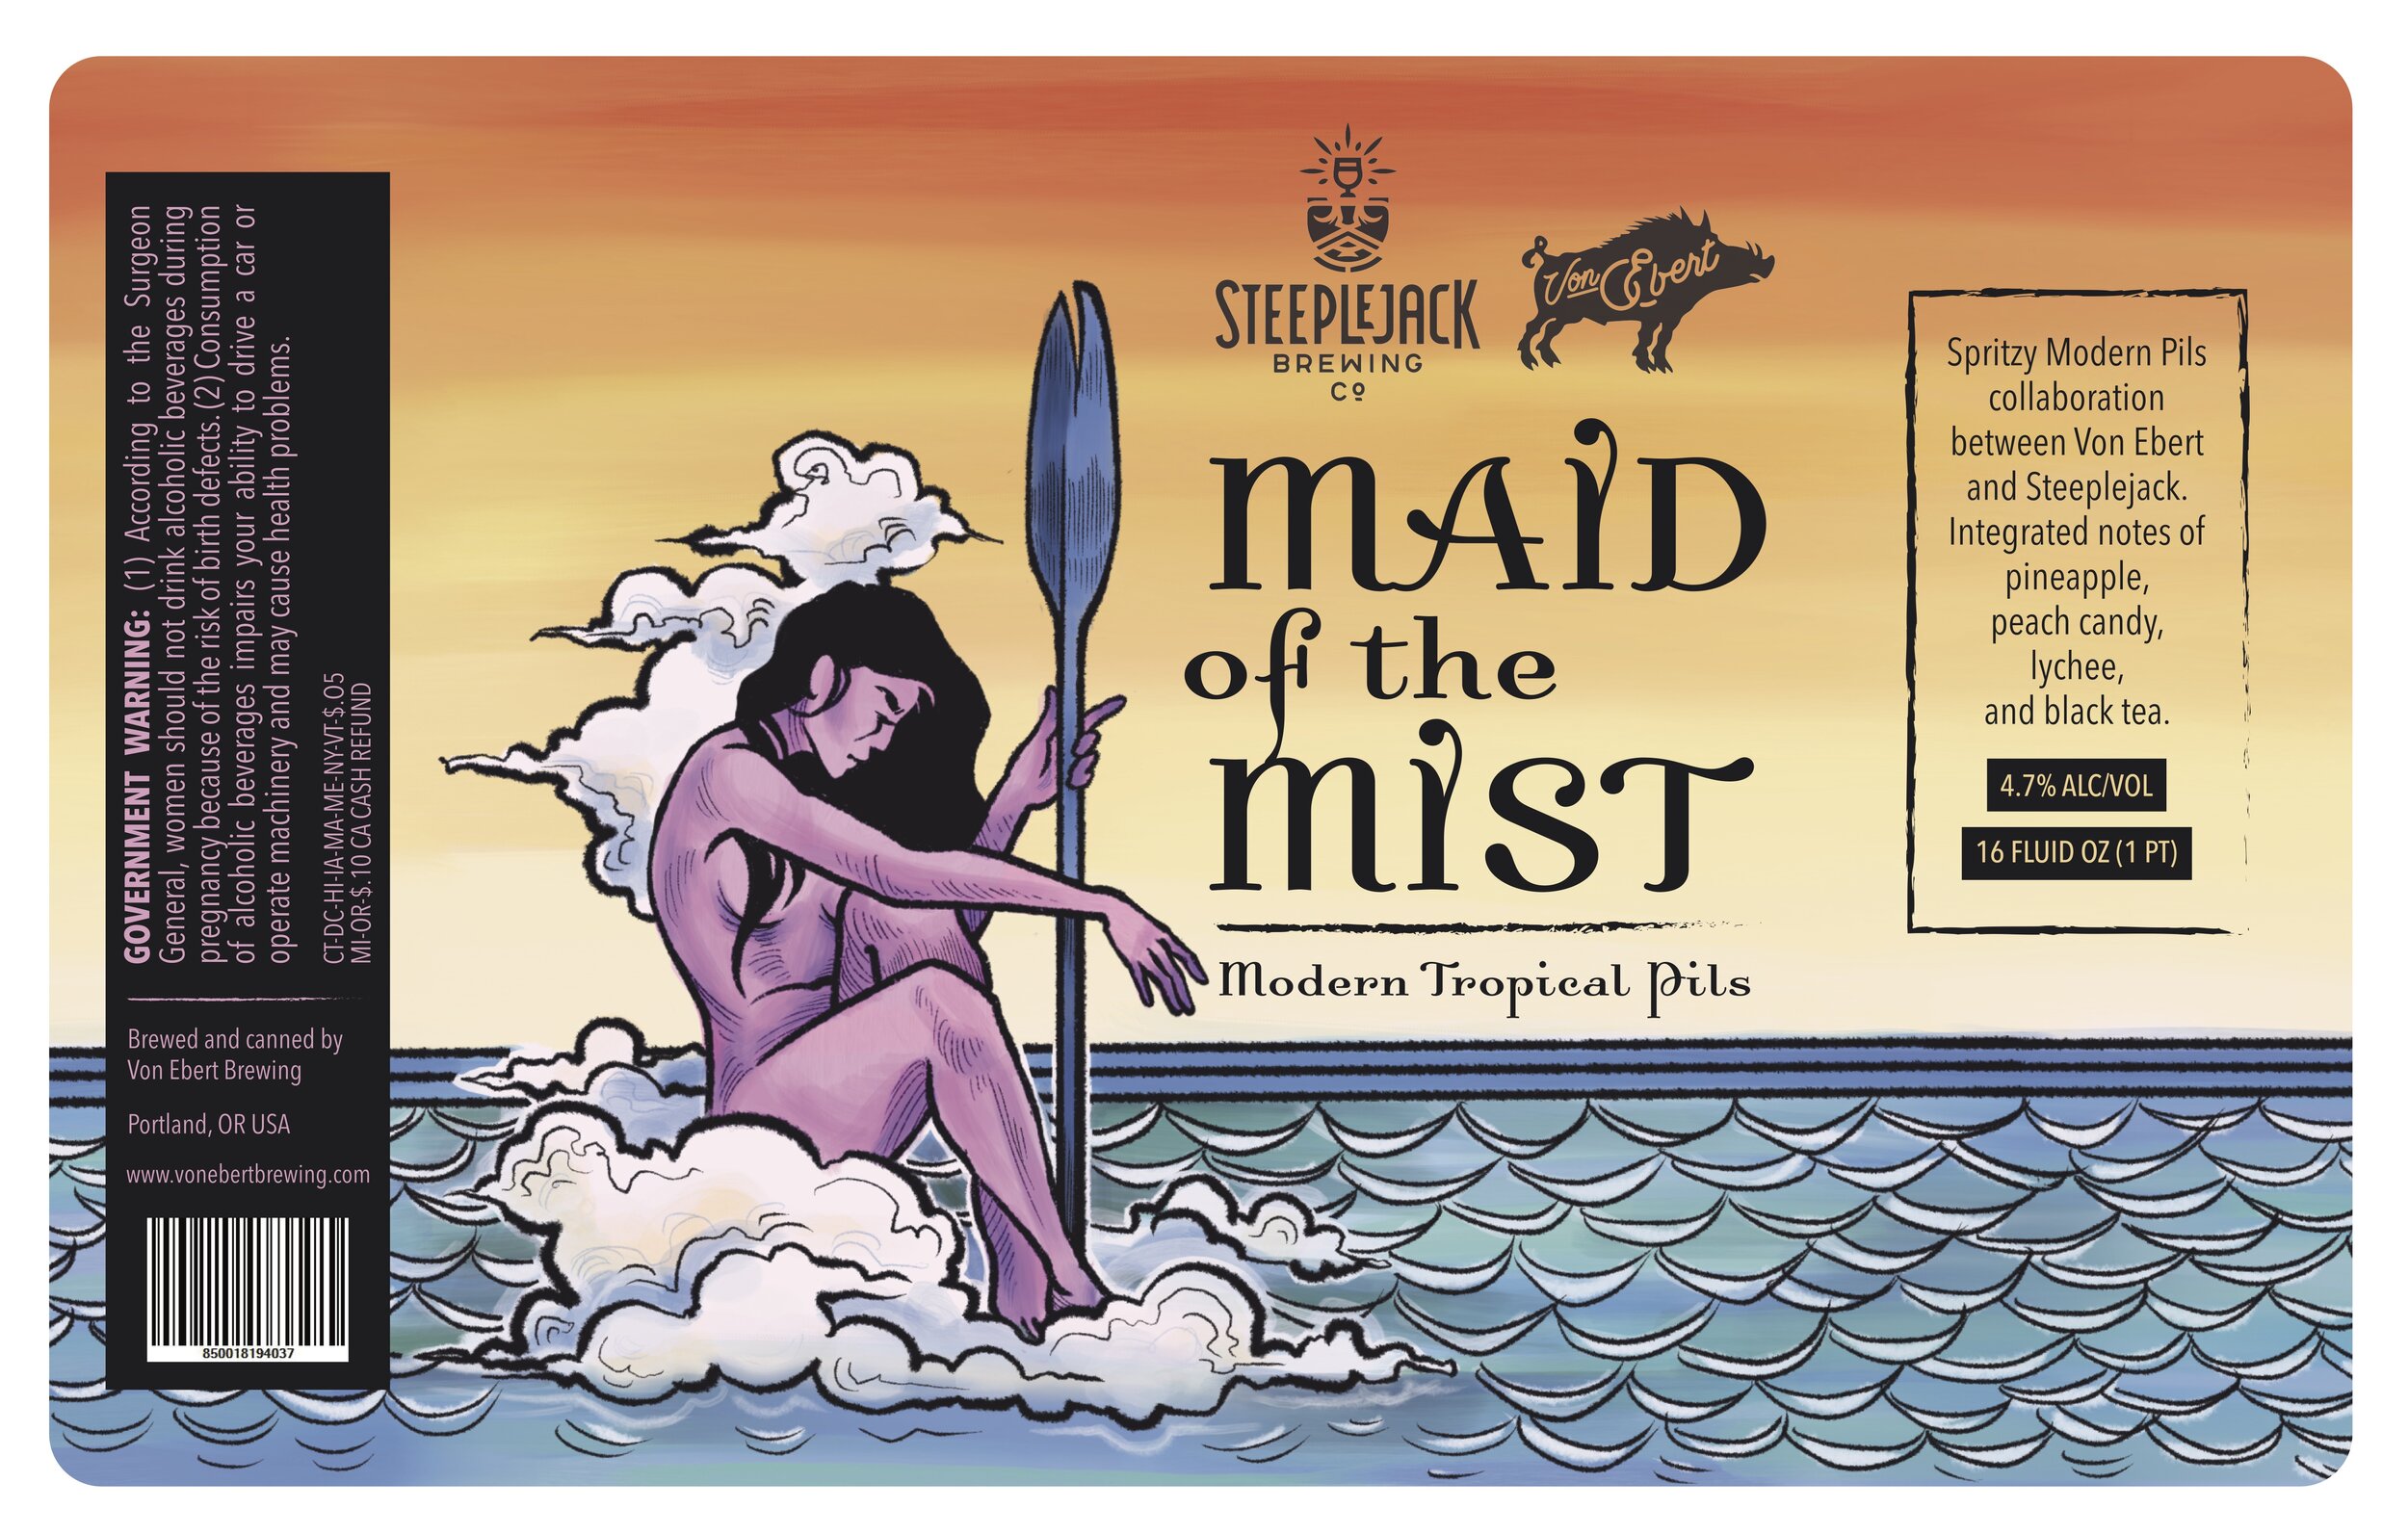 Maid of the Mist Modern Tropical Pils